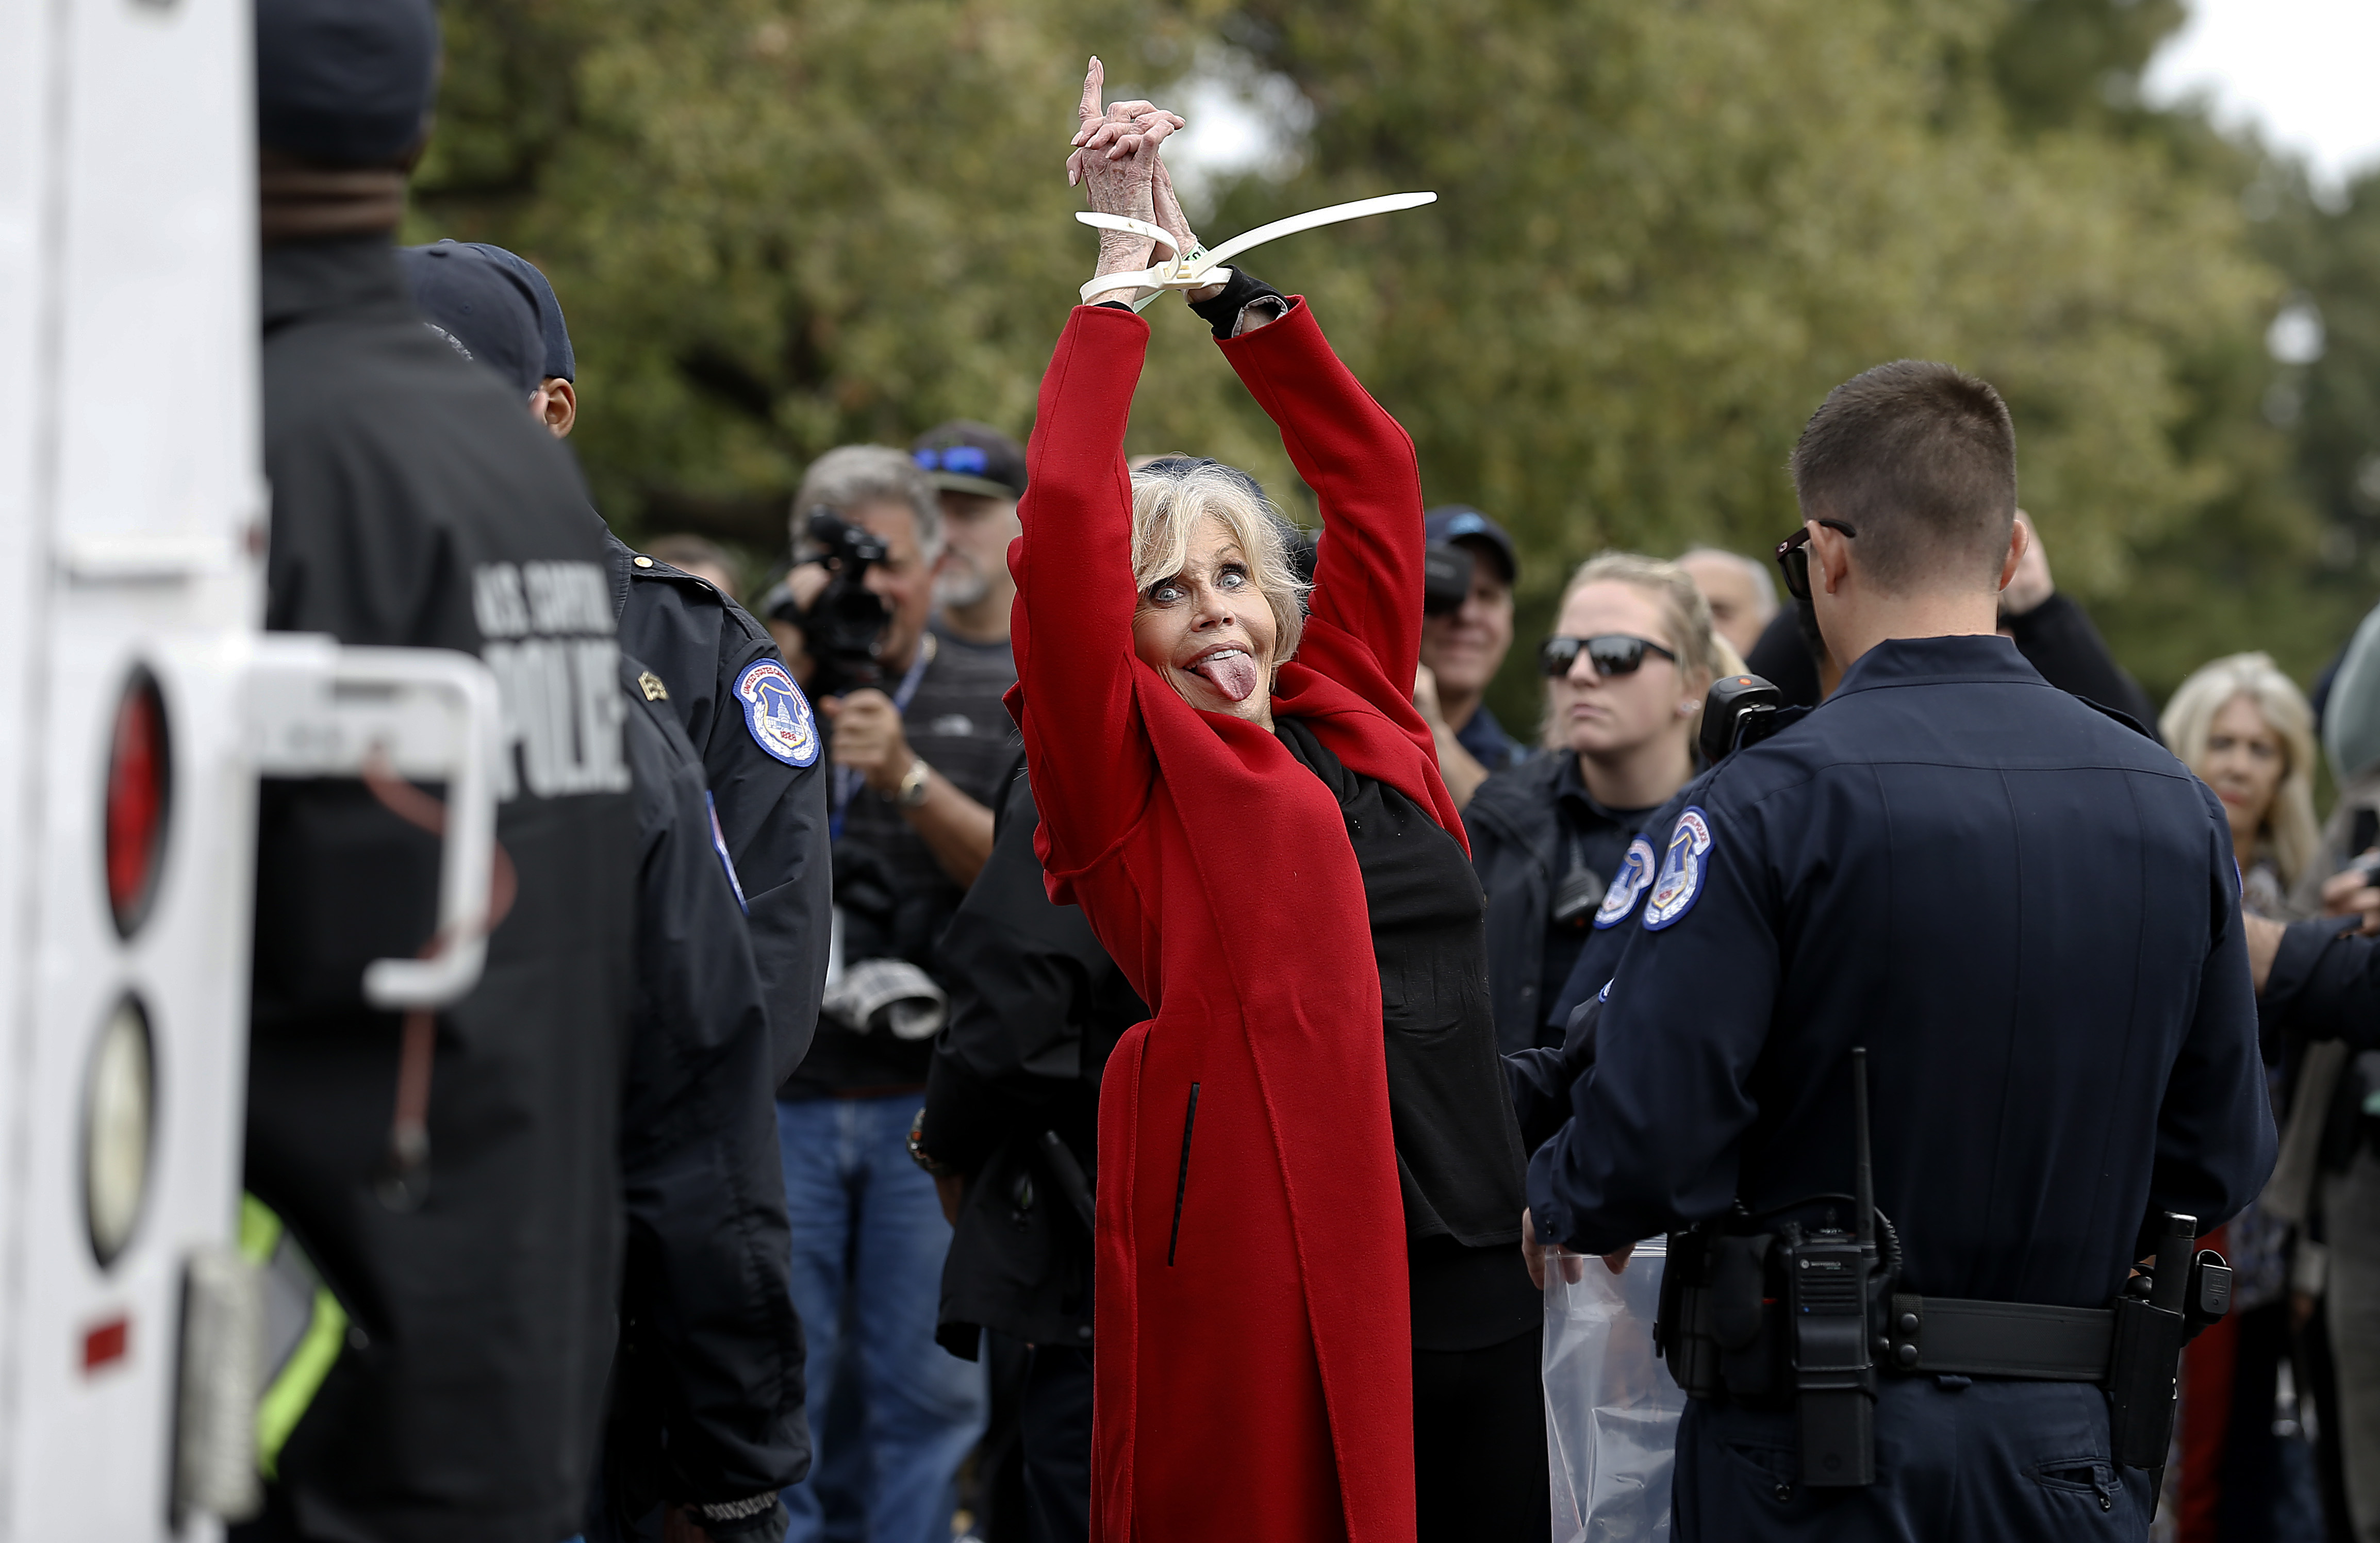 Jane Fonda during the "Fire Drill Friday" Climate Change Protest on October 25, 2019 in Washington, DC